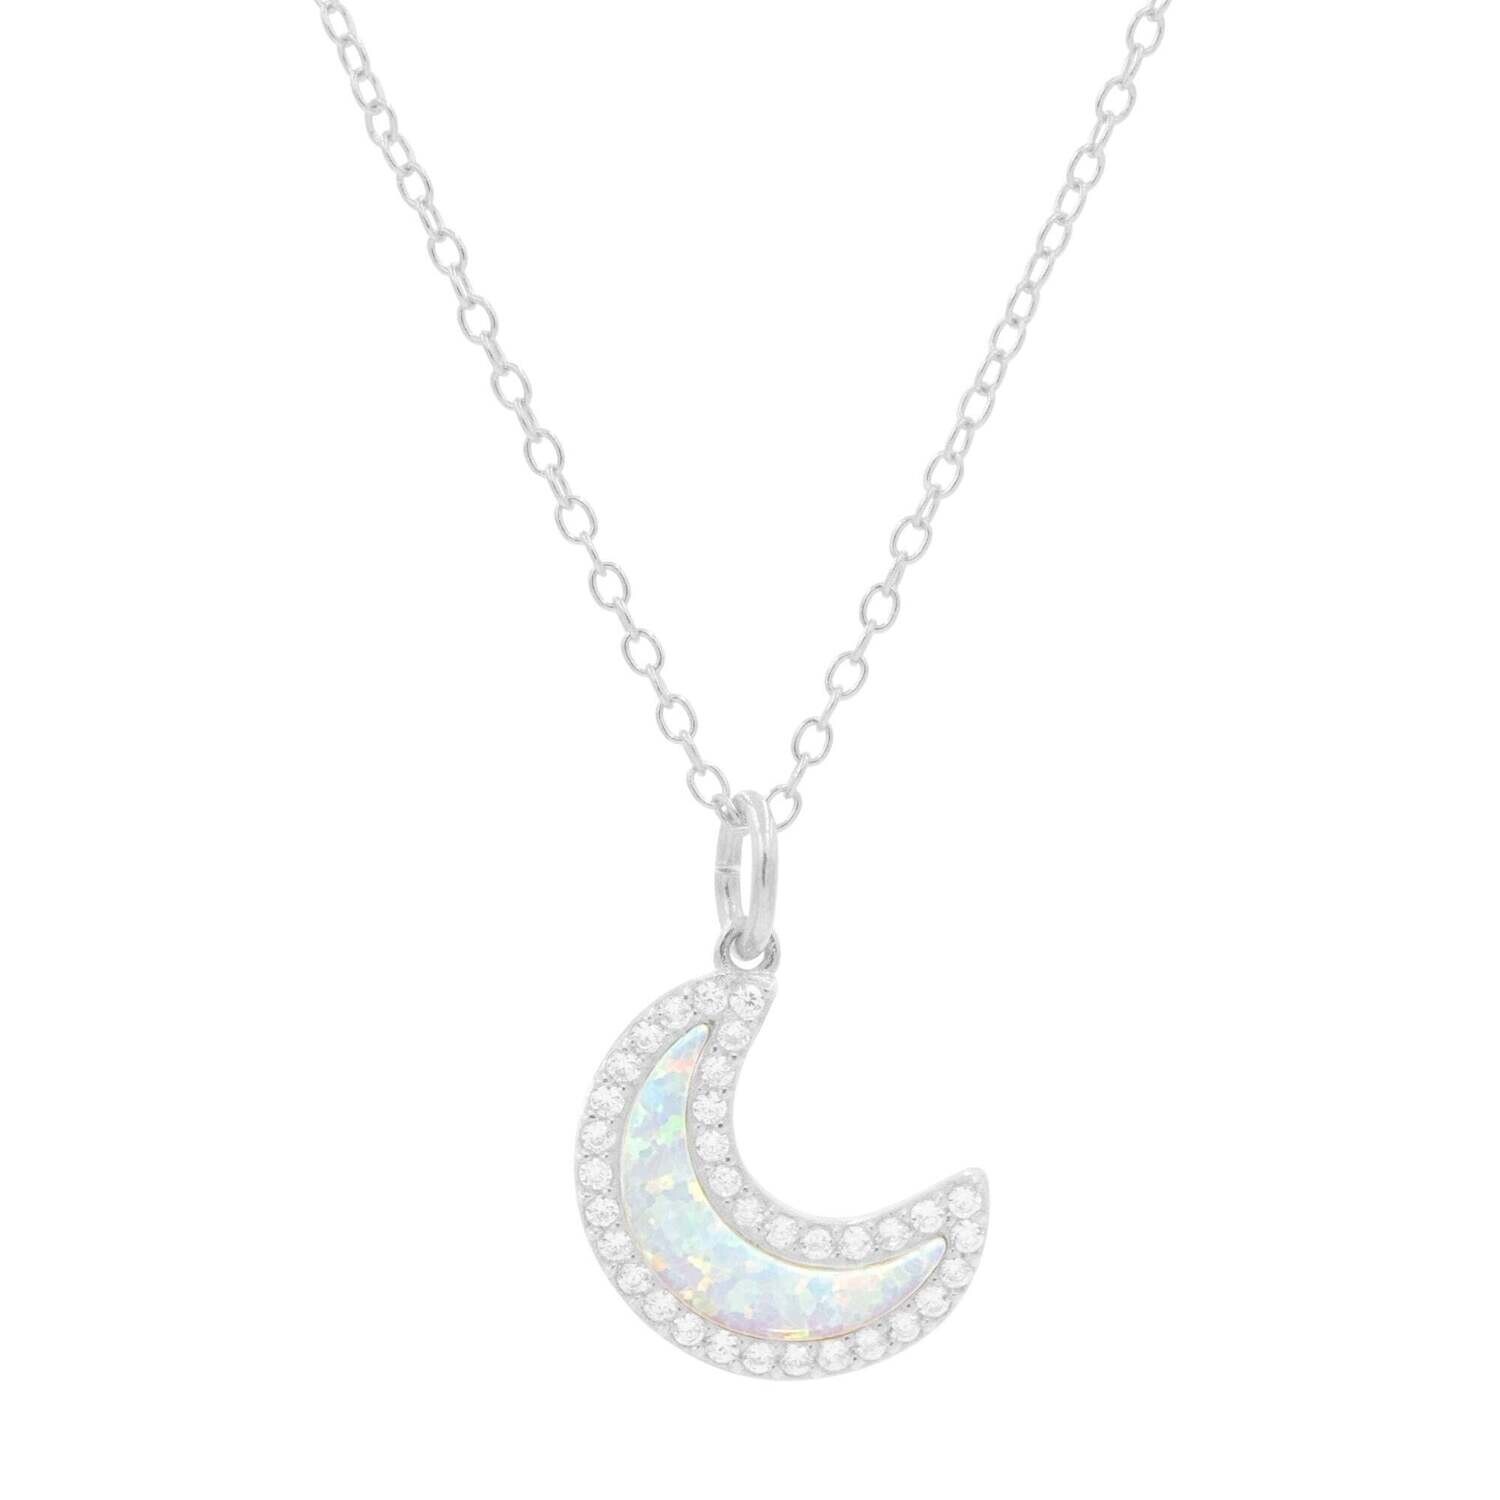 Kamaria White Opal Moon Necklace (Silver)